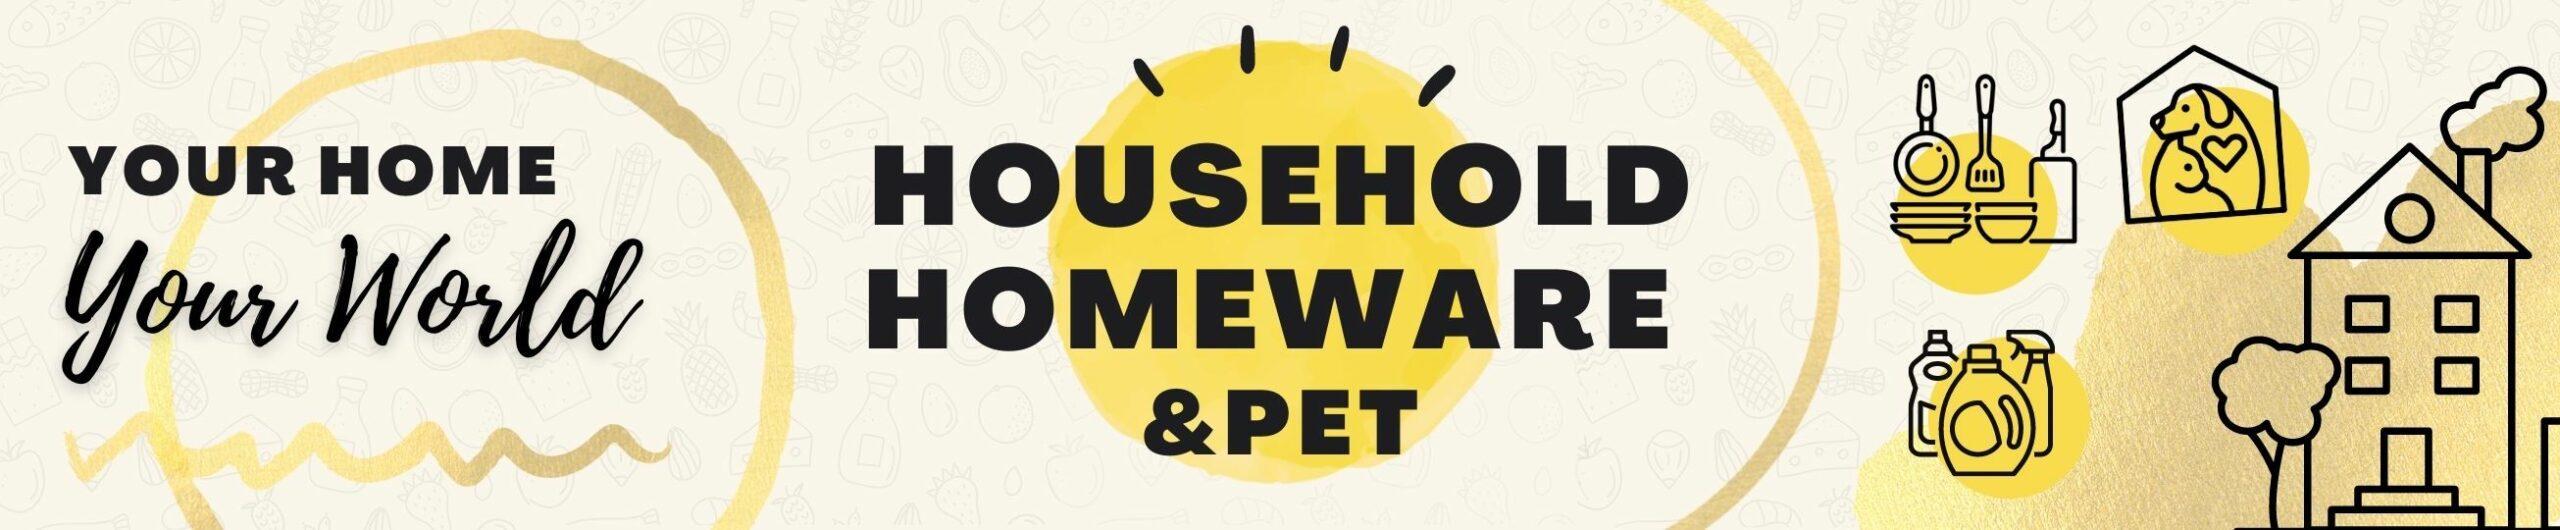 household-homeware-and-pet-banner